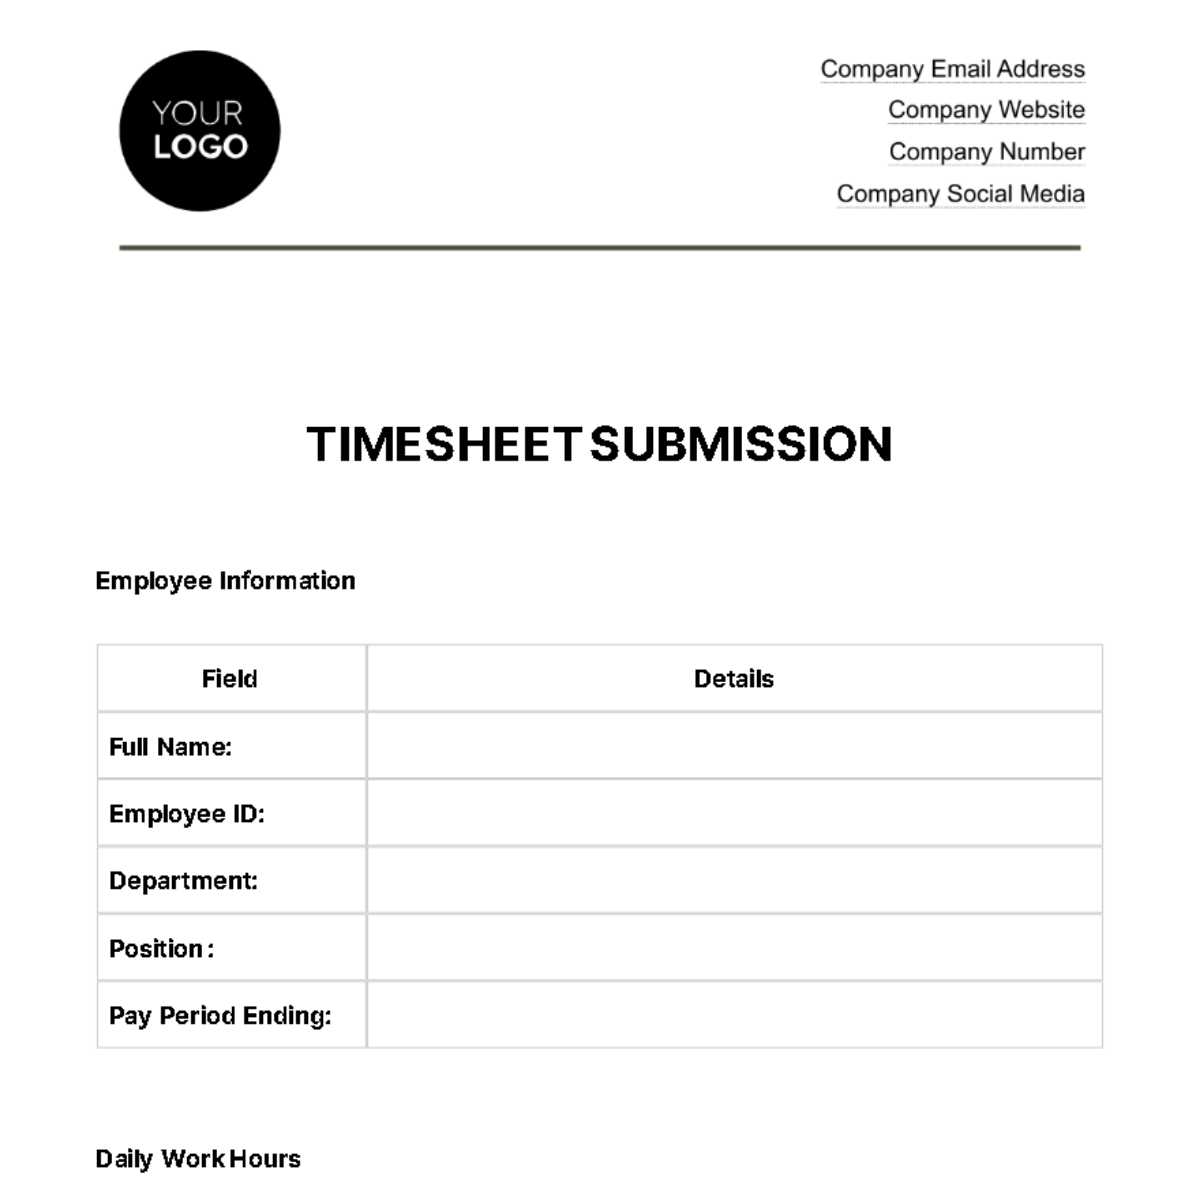 Free Timesheet Submission HR Template